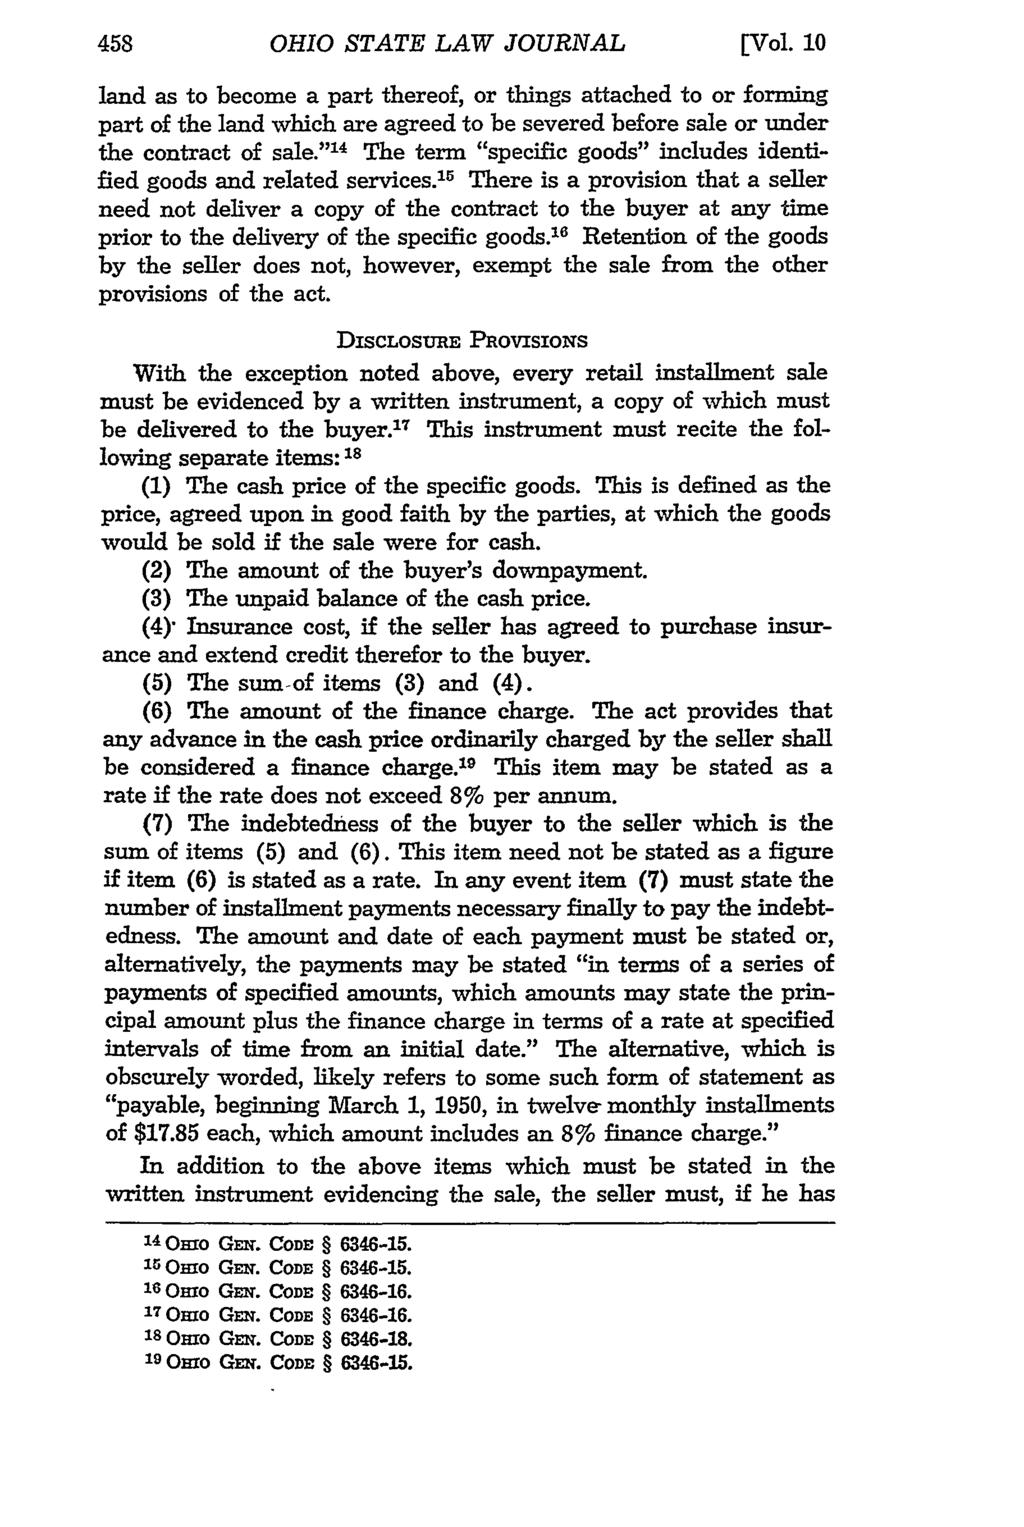 OHIO STATE LAW JOURNAL [Vol. 10 land as to become a part thereof, or things attached to or forming part of the land which are agreed to be severed before sale or under the contract of sale.